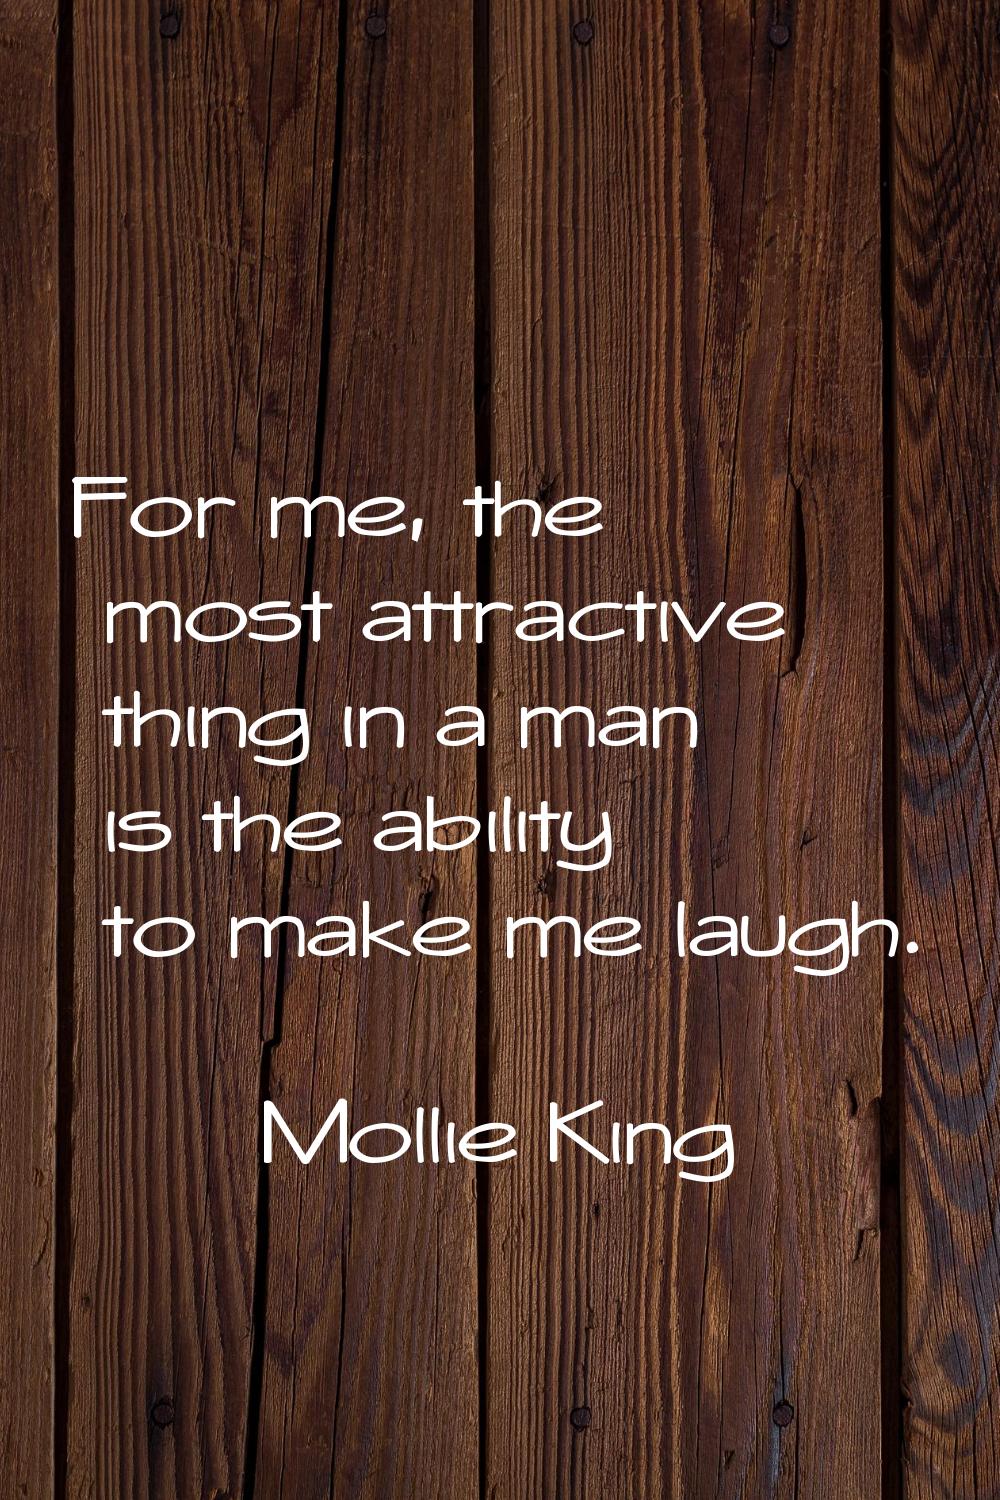 For me, the most attractive thing in a man is the ability to make me laugh.